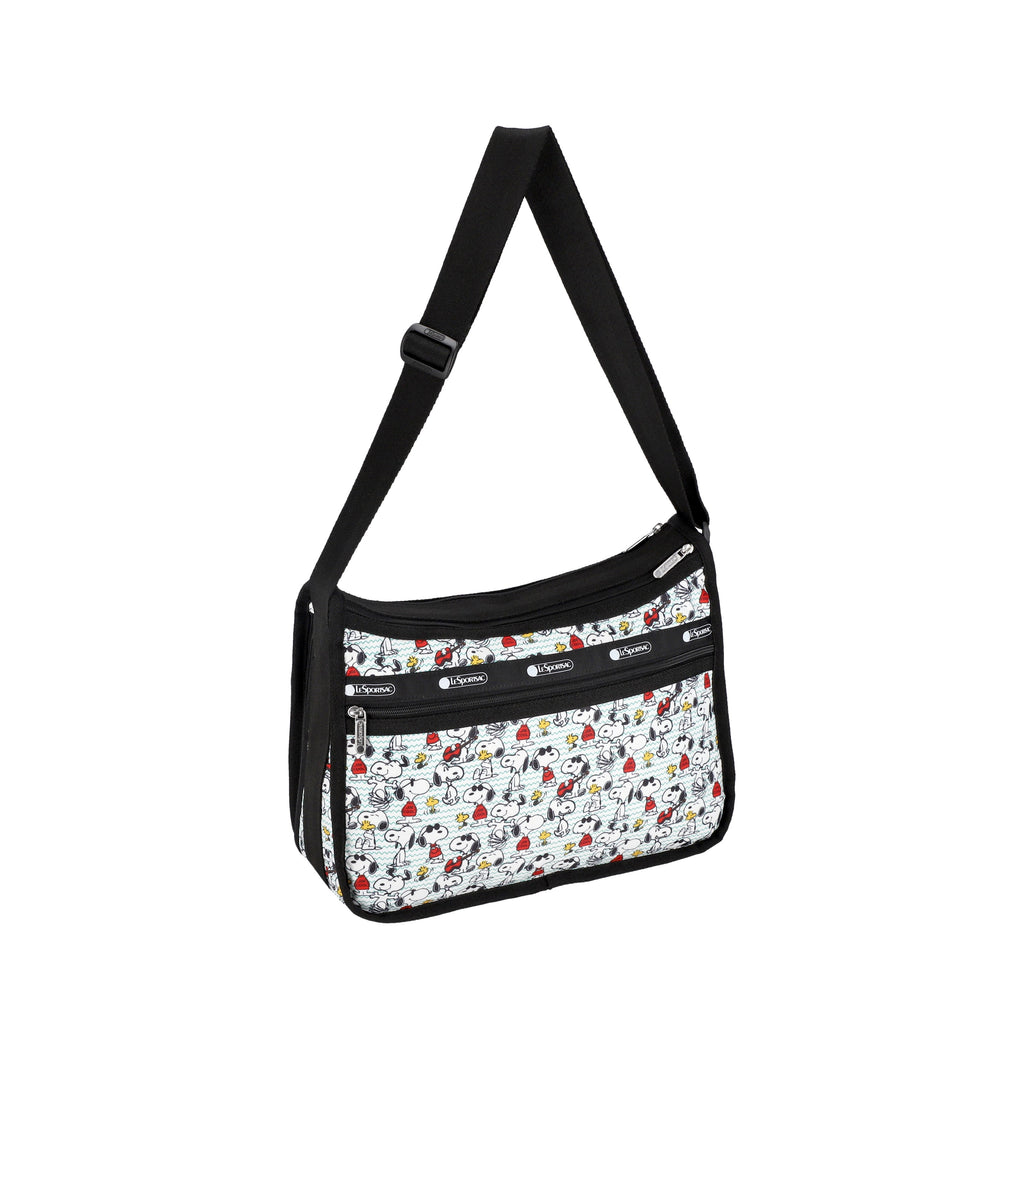 Lesportsac Everyday Zip Tote - Black Solid